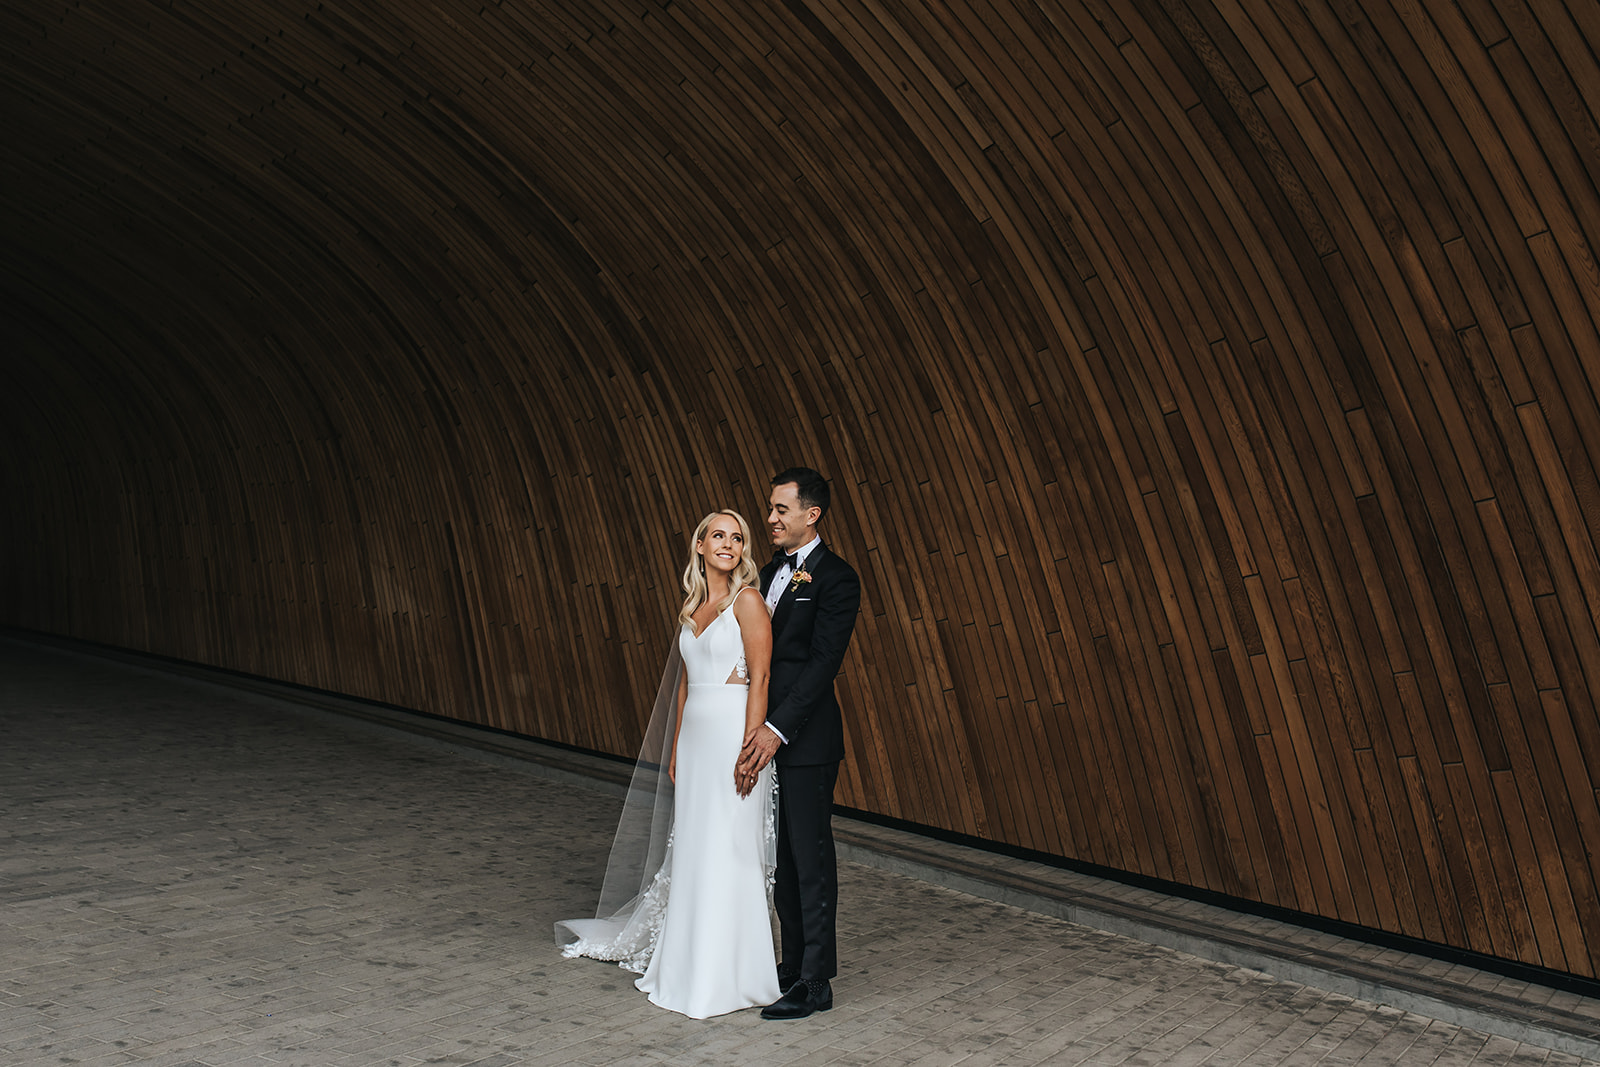 Cameron and Nicole’s Chic and Unforgettable Venue308 Summer Wedding